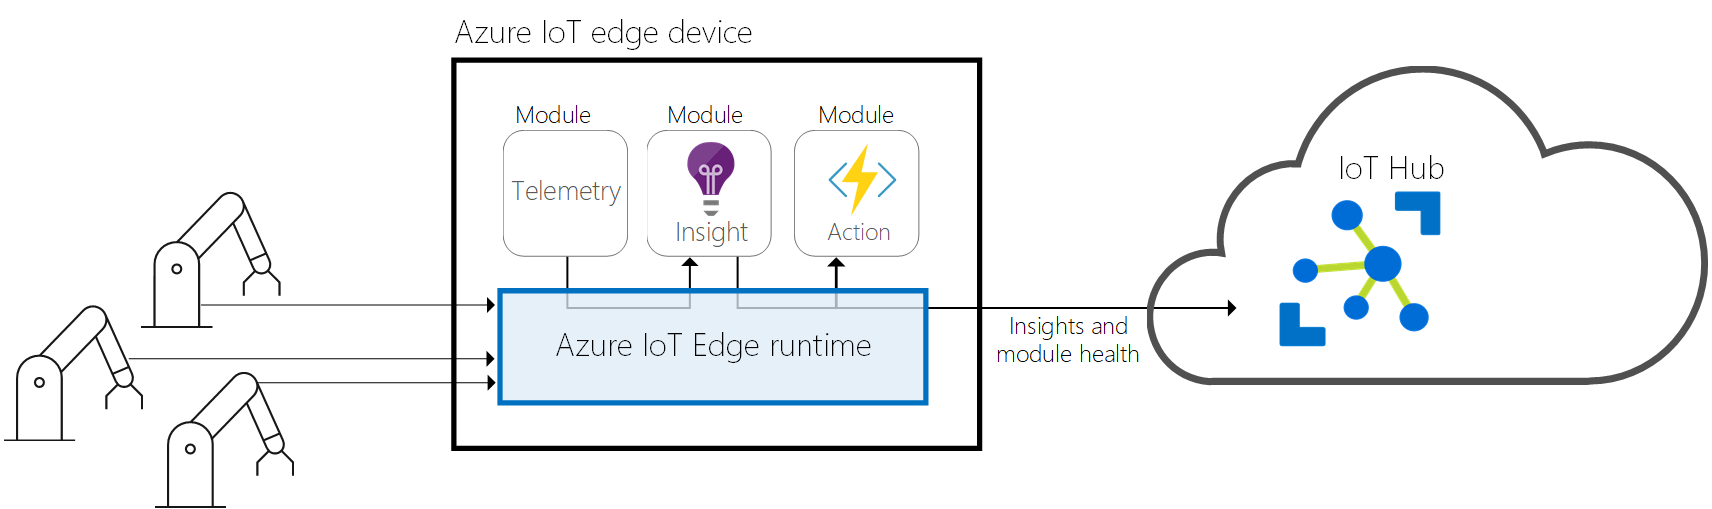 IoT Edge runtime sends insights and reporting to IoT Hub